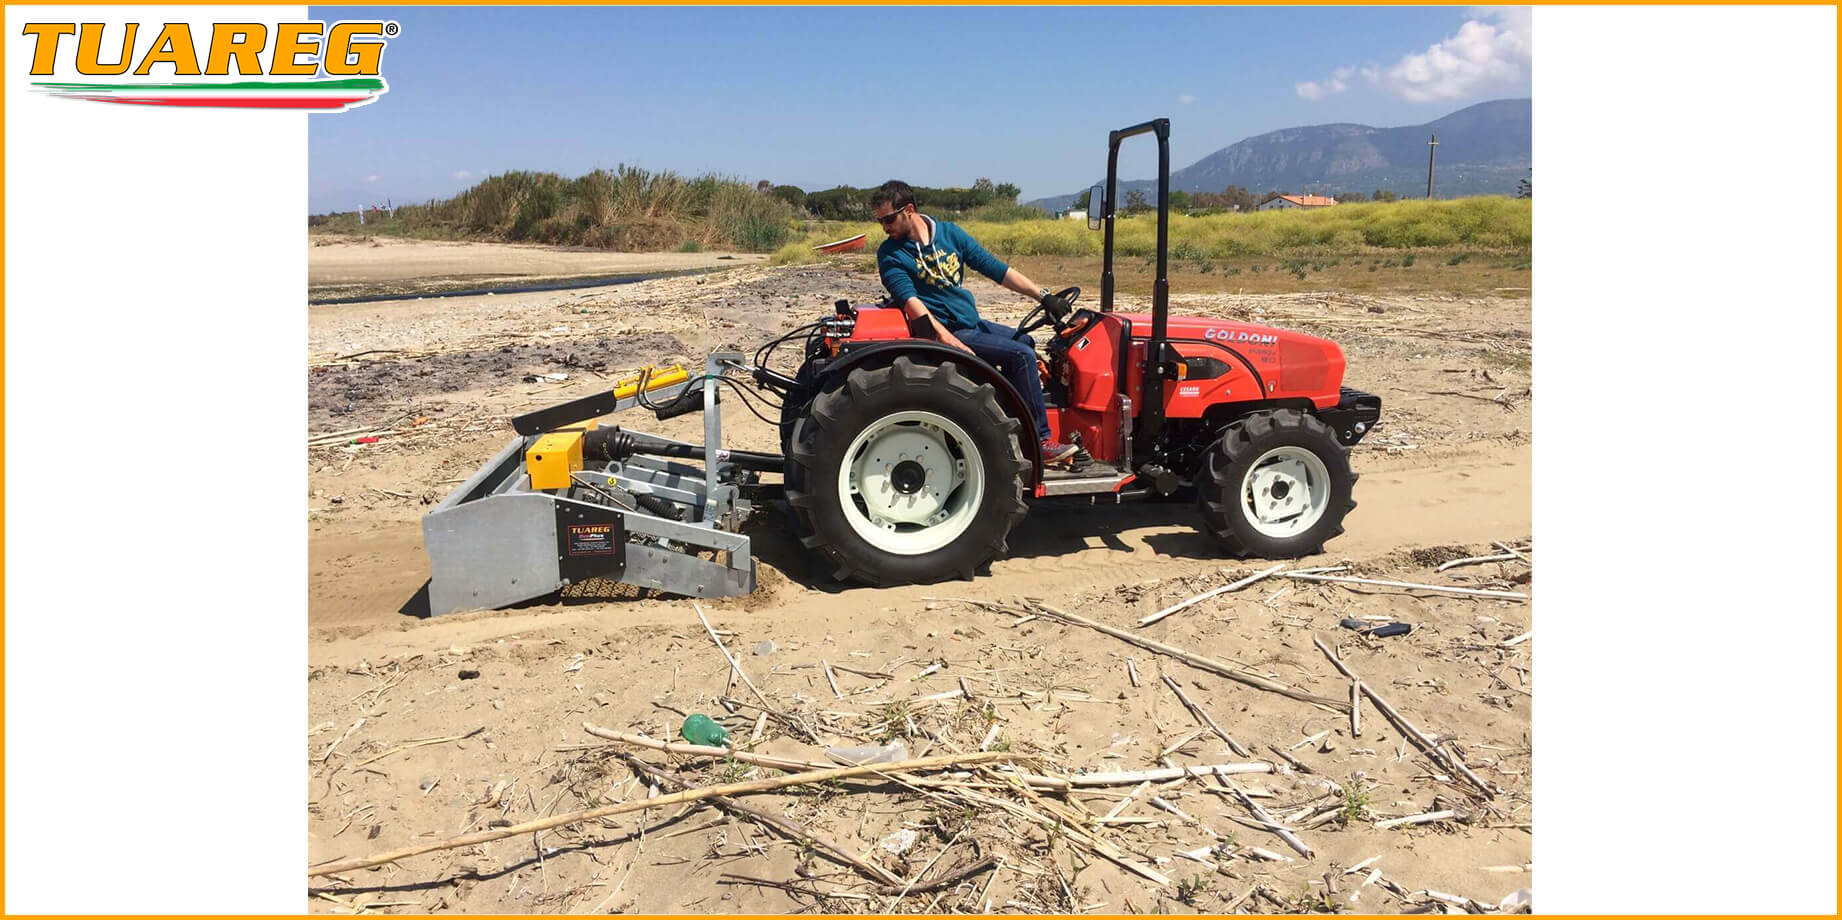 Tuareg EvoPlus - Beach Cleaning Machine - Attached to a Tractor